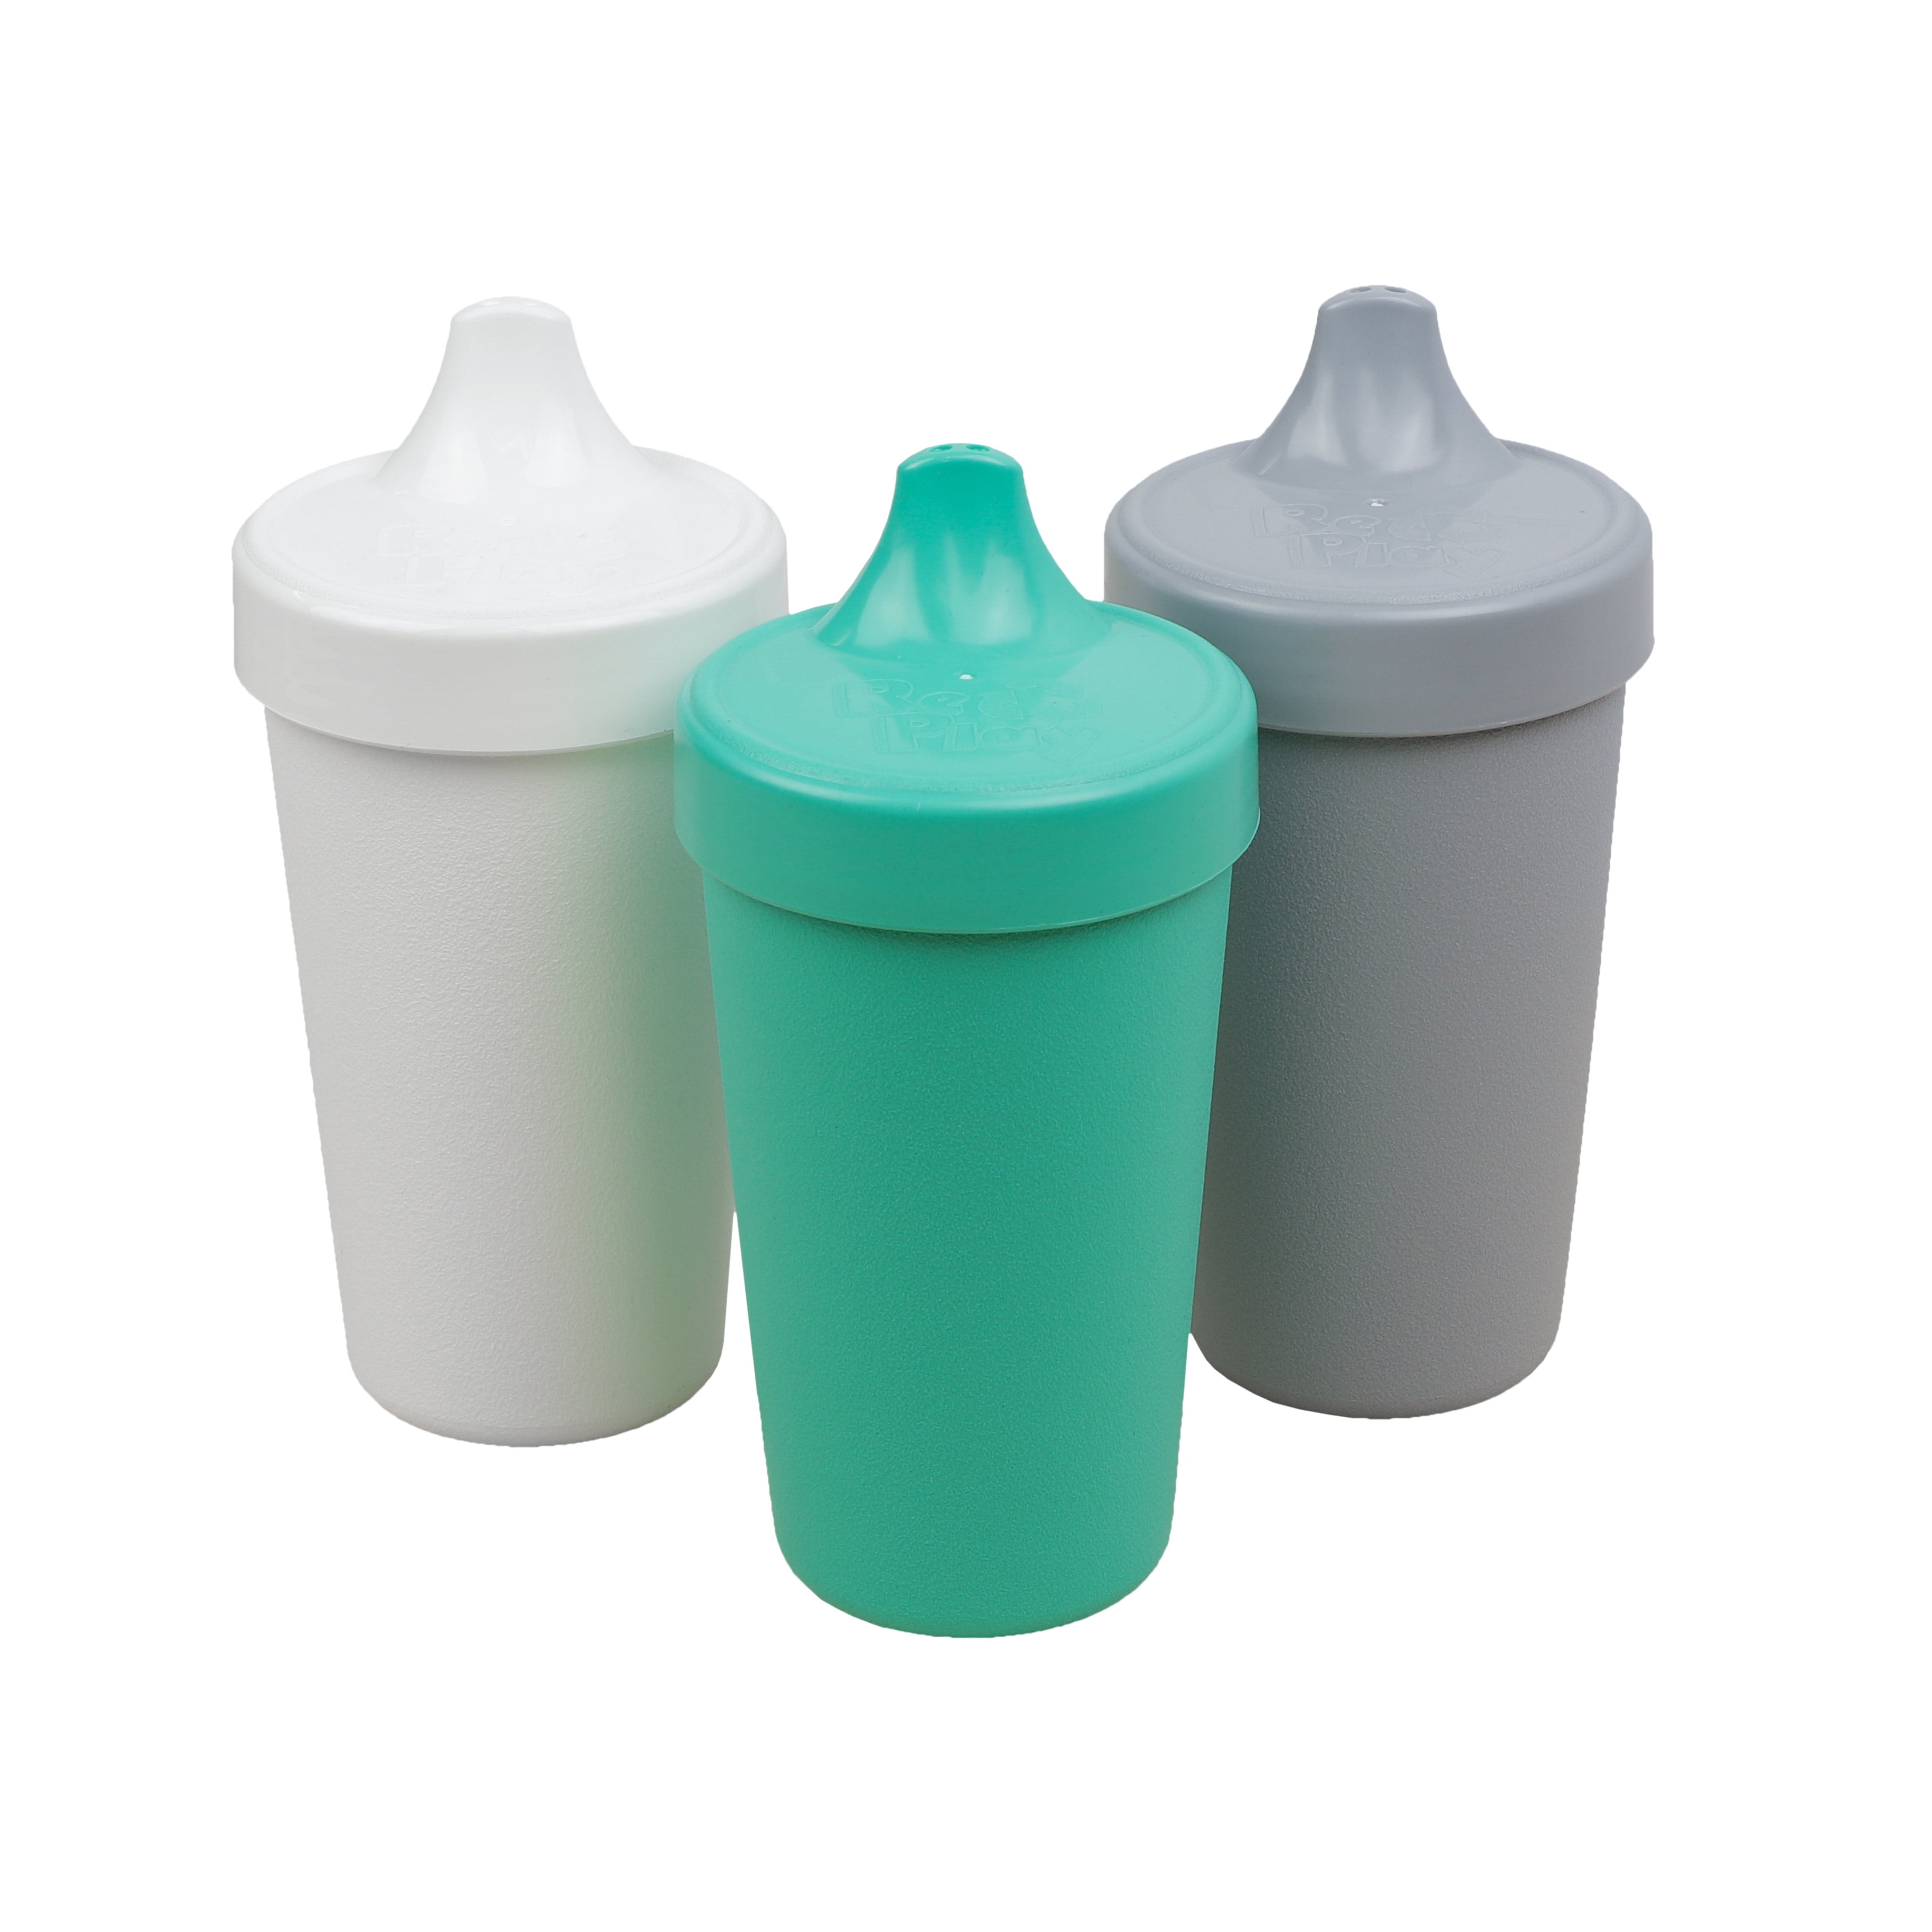 Re-Play Made in USA 3pk Toddler Feeding No Spill Sippy Cups for